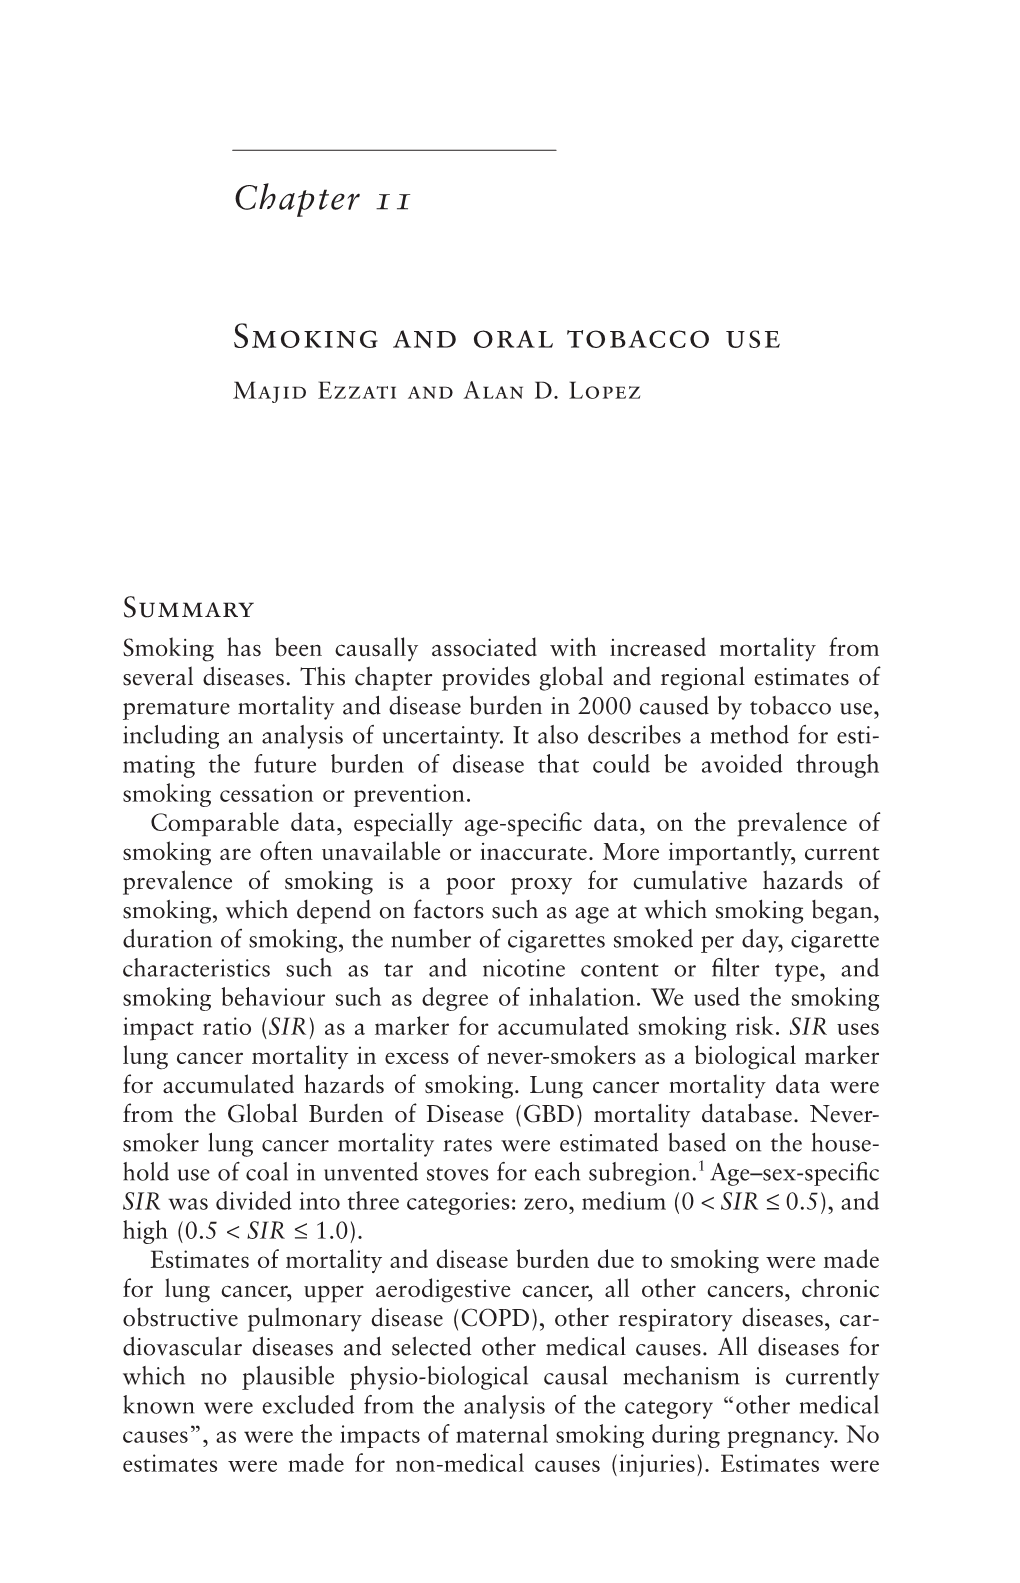 Chapter 11 Smoking and Oral Tobacco